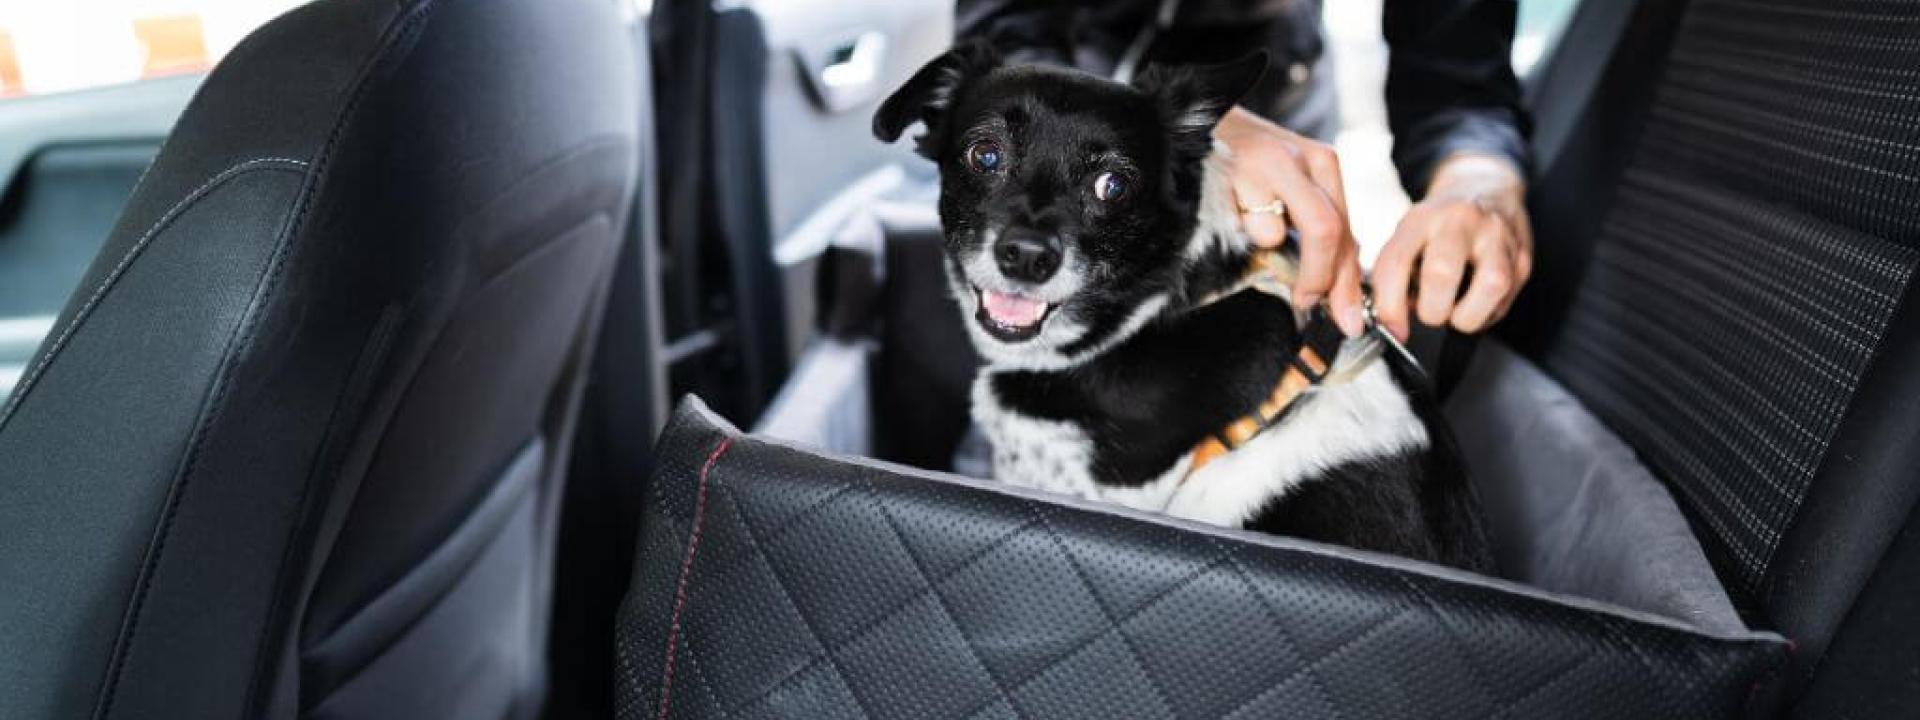 A small dog restrained in a car for good pet care safety.